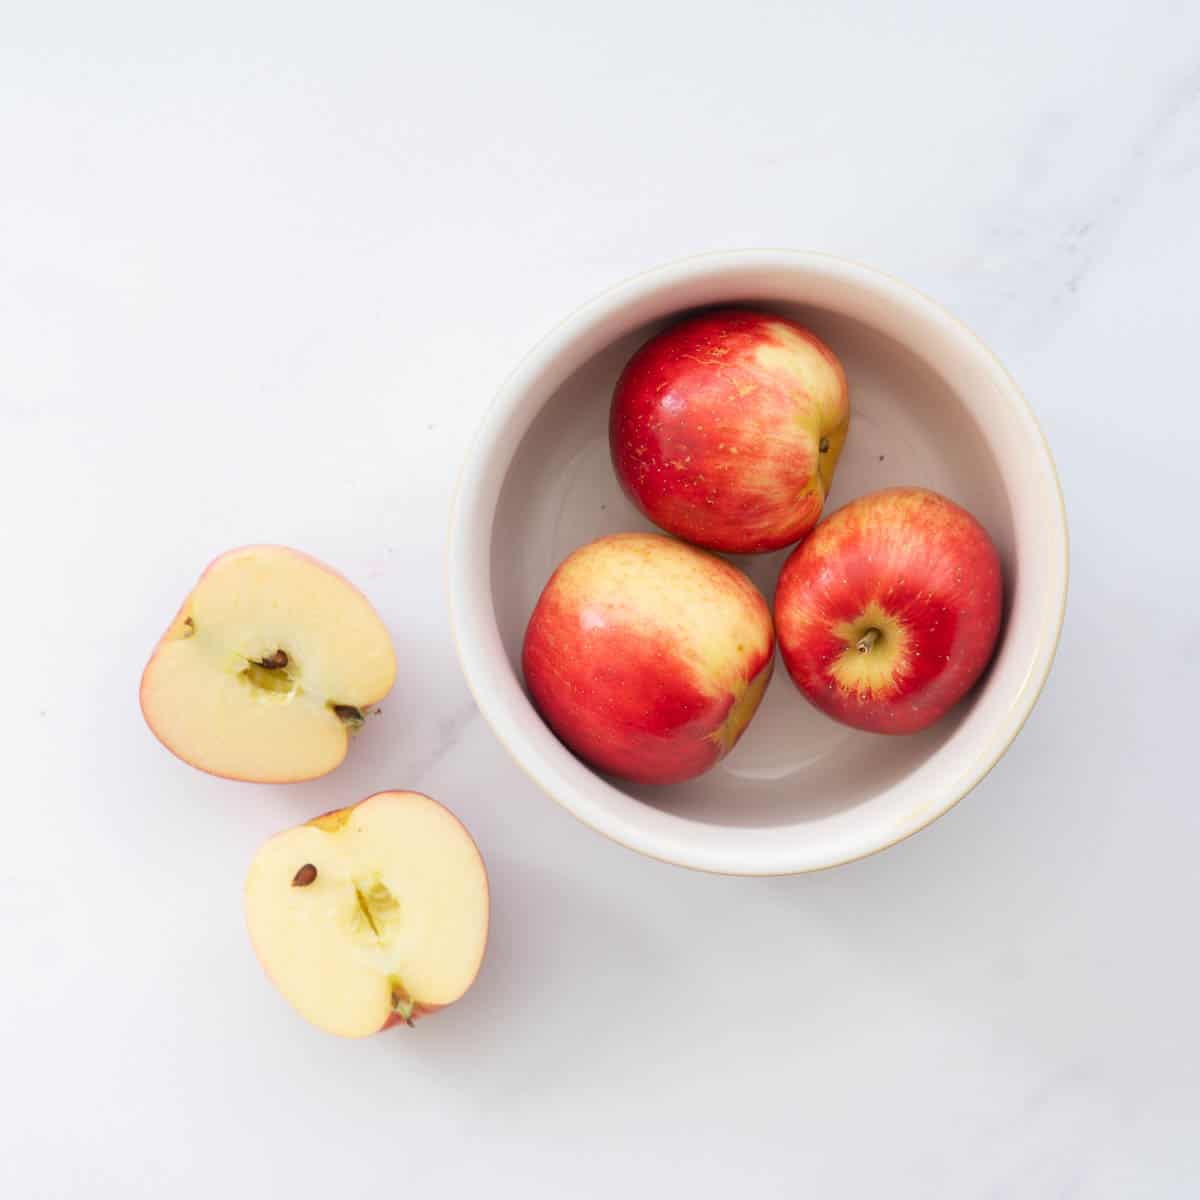 Three red skinned apples in a small bowl, next to a haved apple on a light marble bench.